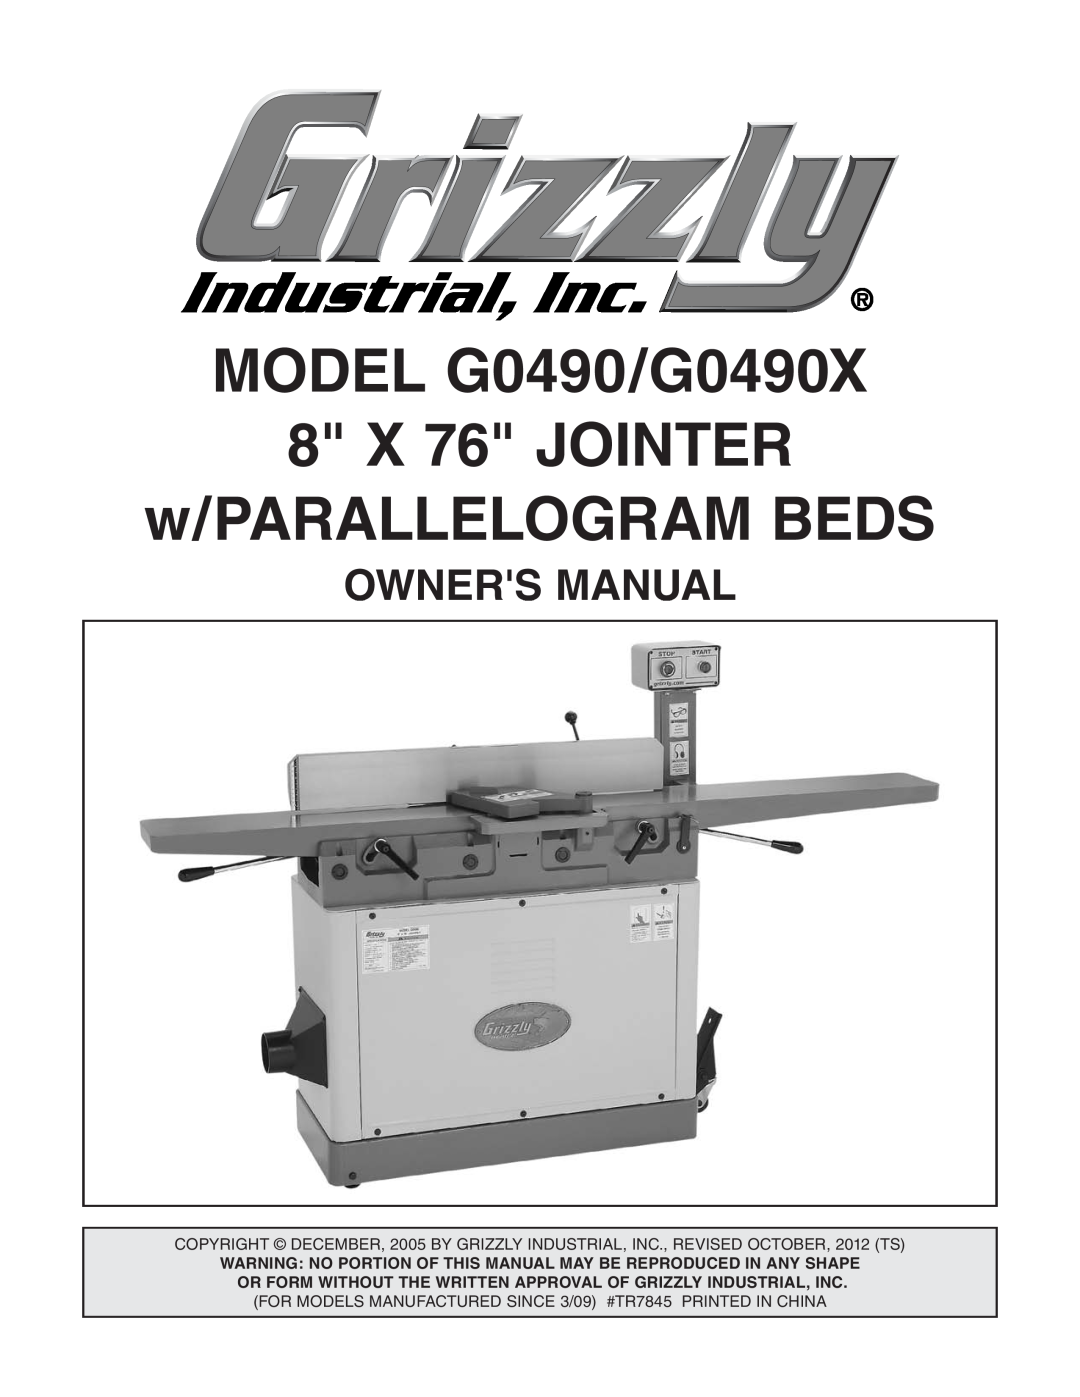 Grizzly owner manual Owners Manual, MODEL G0490/G0490X 8 X 76 JOINTER w/PARALLELOGRAM BEDS 